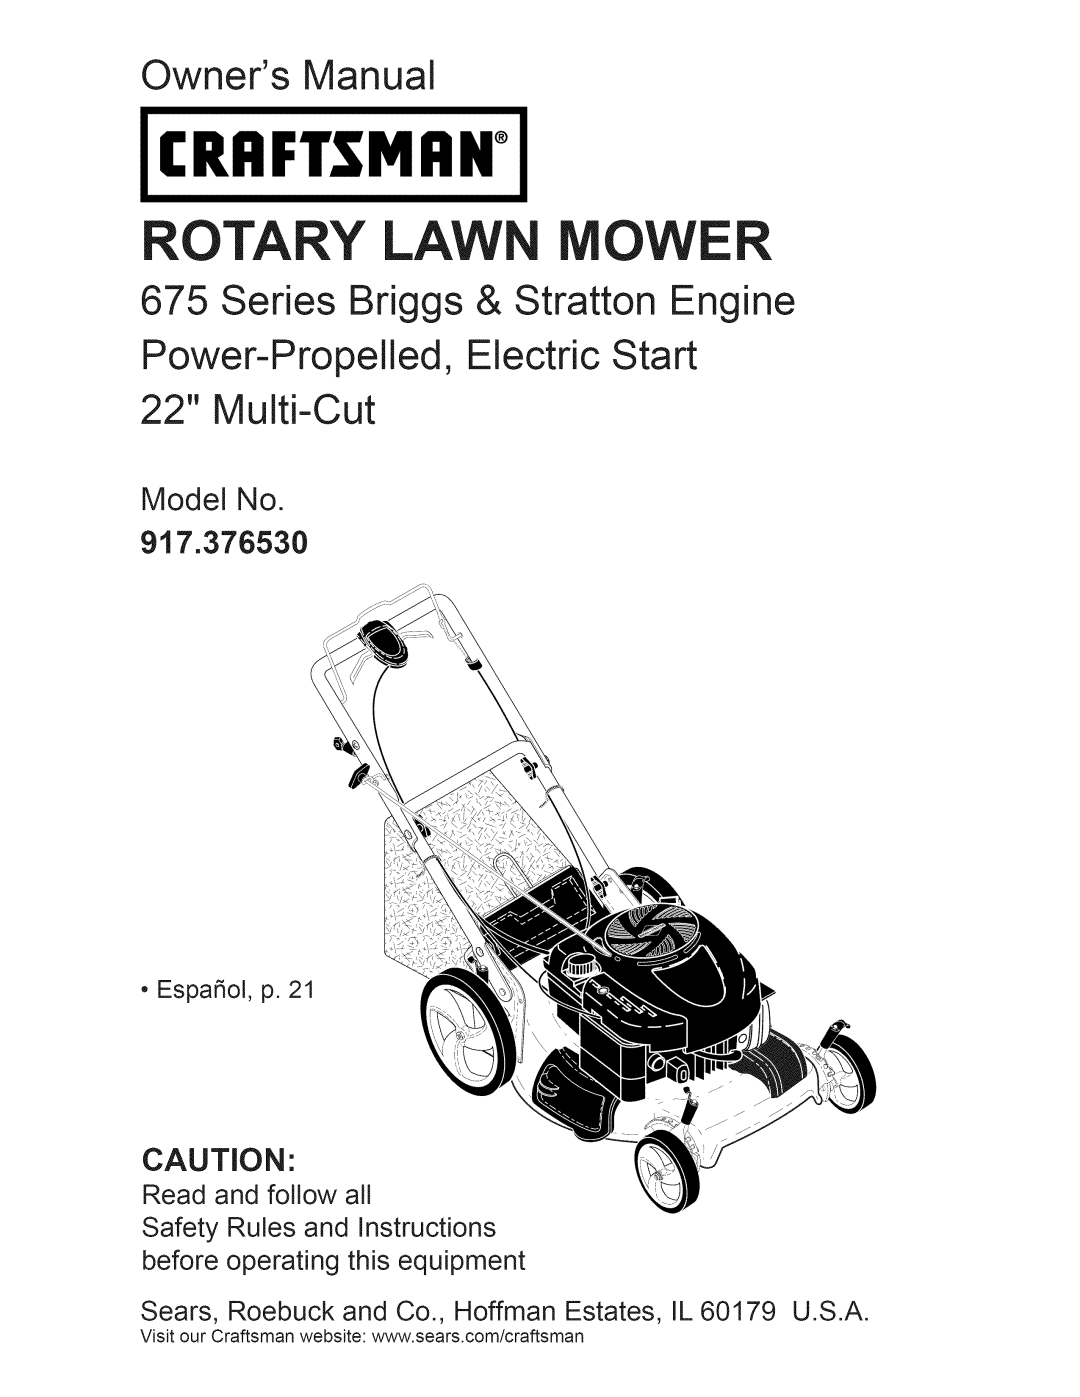 Craftsman 917.376530 owner manual Owners Manual, Series Briggs & Stratton Engine, Model No, Craftsman, Rotary Lawn Mower 